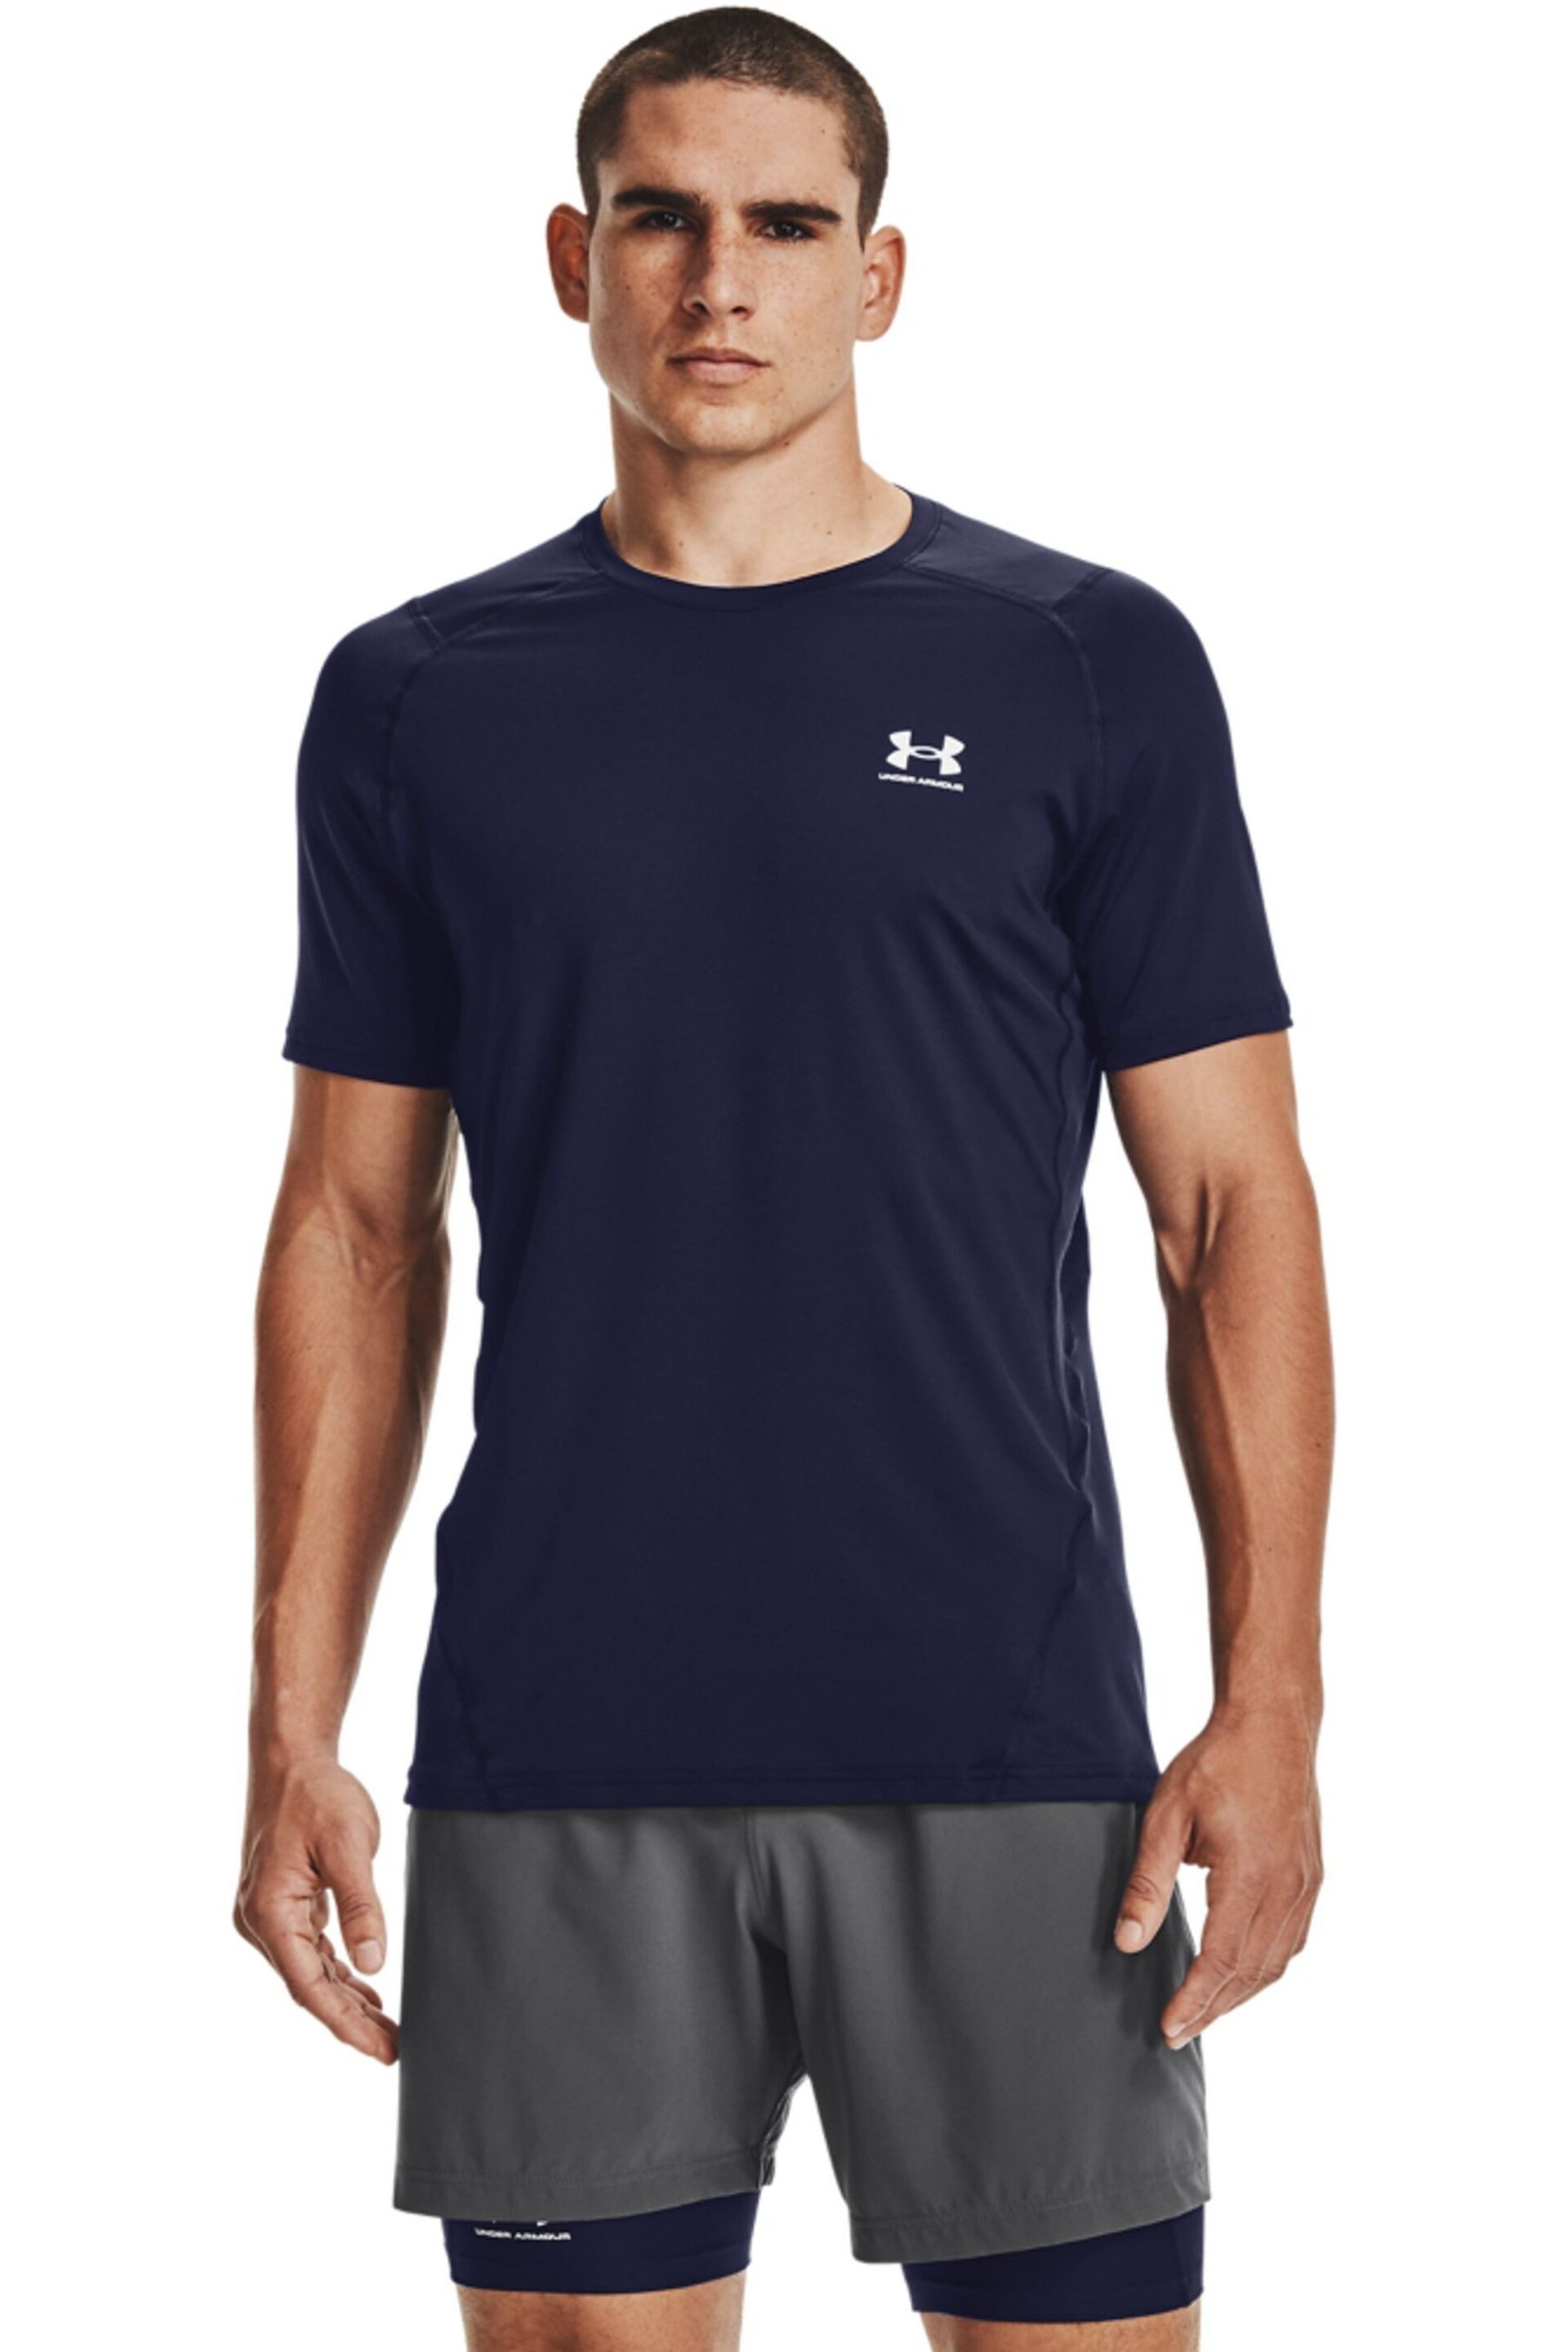 Under Armour Blue Heat Gear Fitted T-Shirt - Image 1 of 7